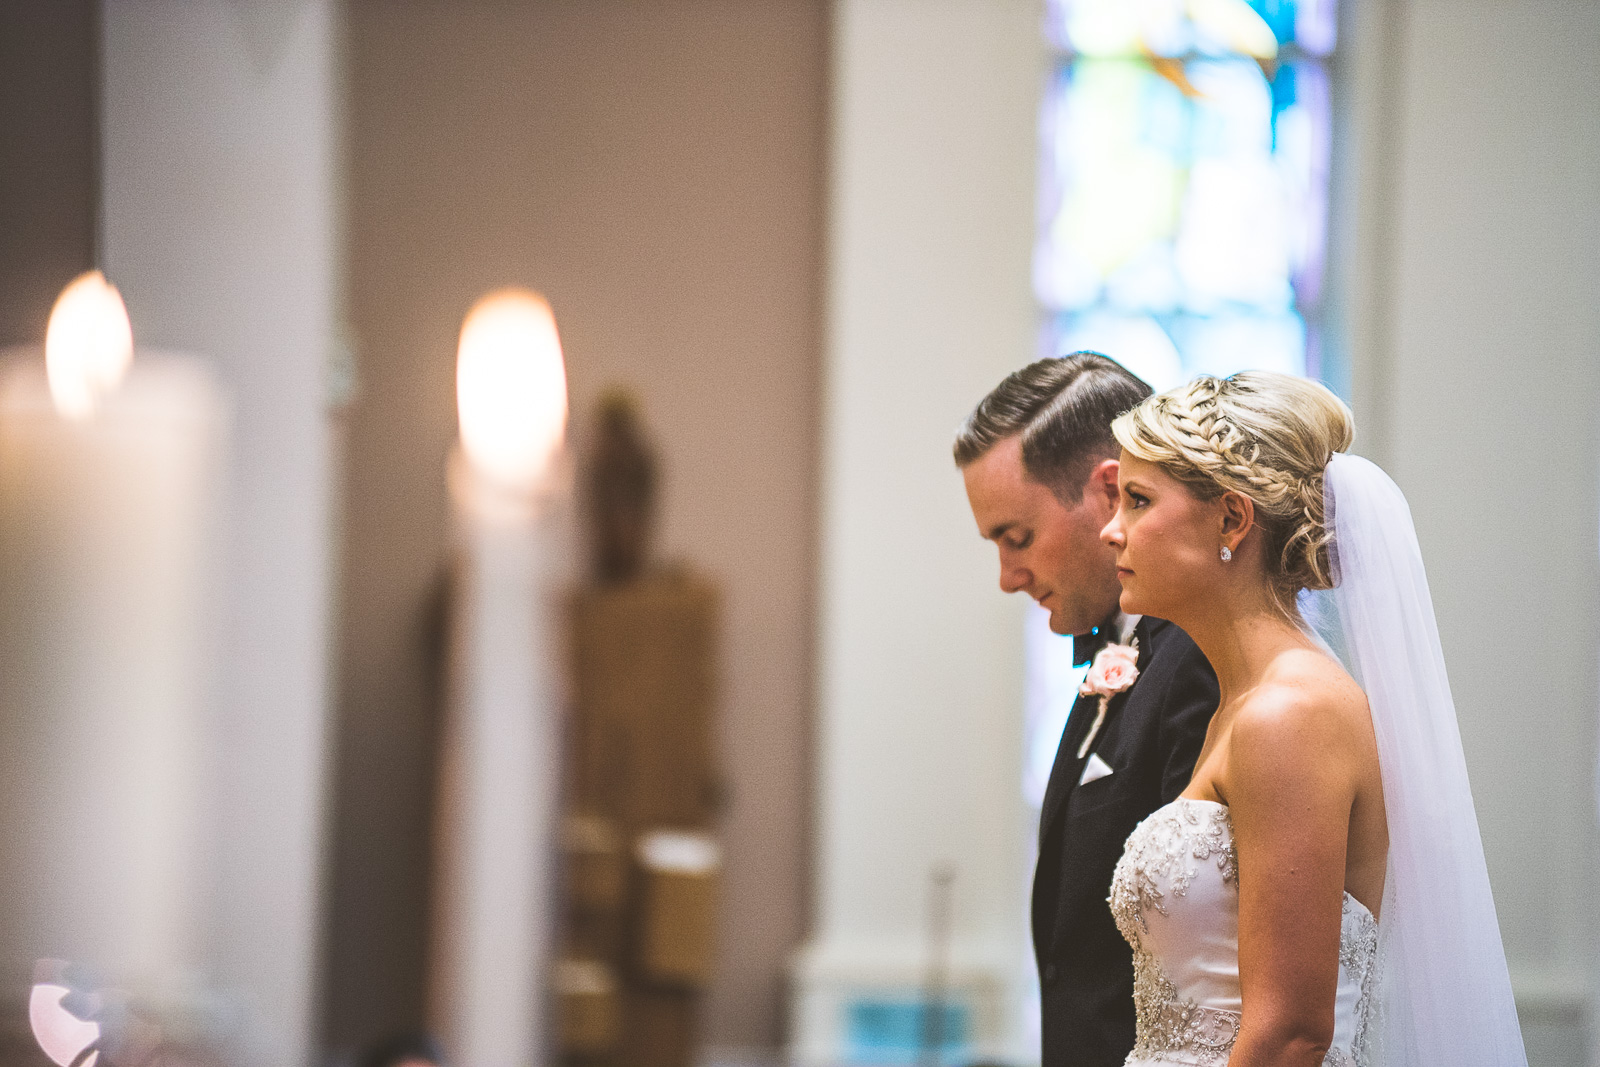 36 3 bride and groom at alter - Kristina + Dave // Wedding Photographer in Chicago